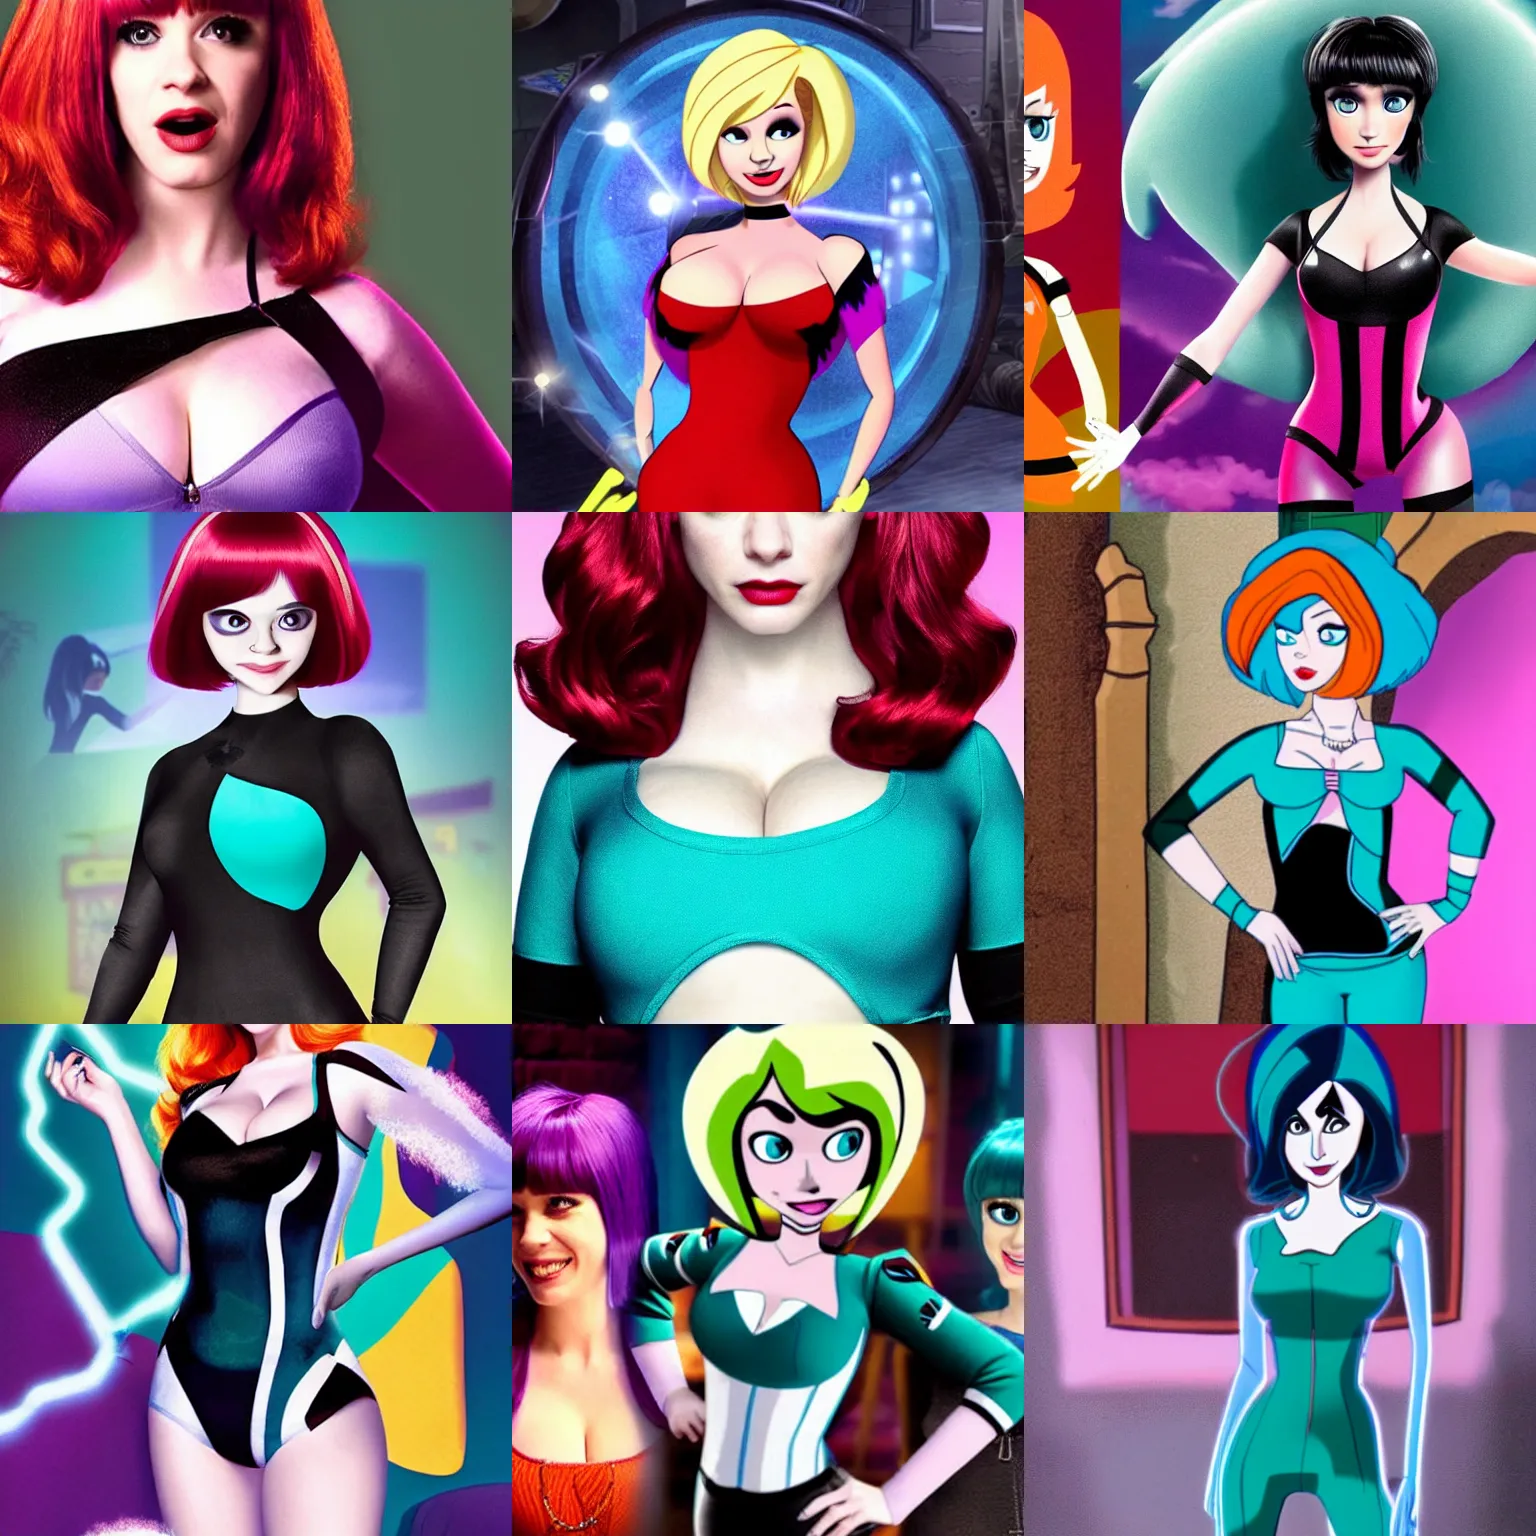 Prompt: a cinematic promotional image of christina hendricks as maddie fenton from the live - action netflix series'danny phantom'; auburn hair ; bob cut ; straight bangs ; loose - fitting teal bodysuit with black neck